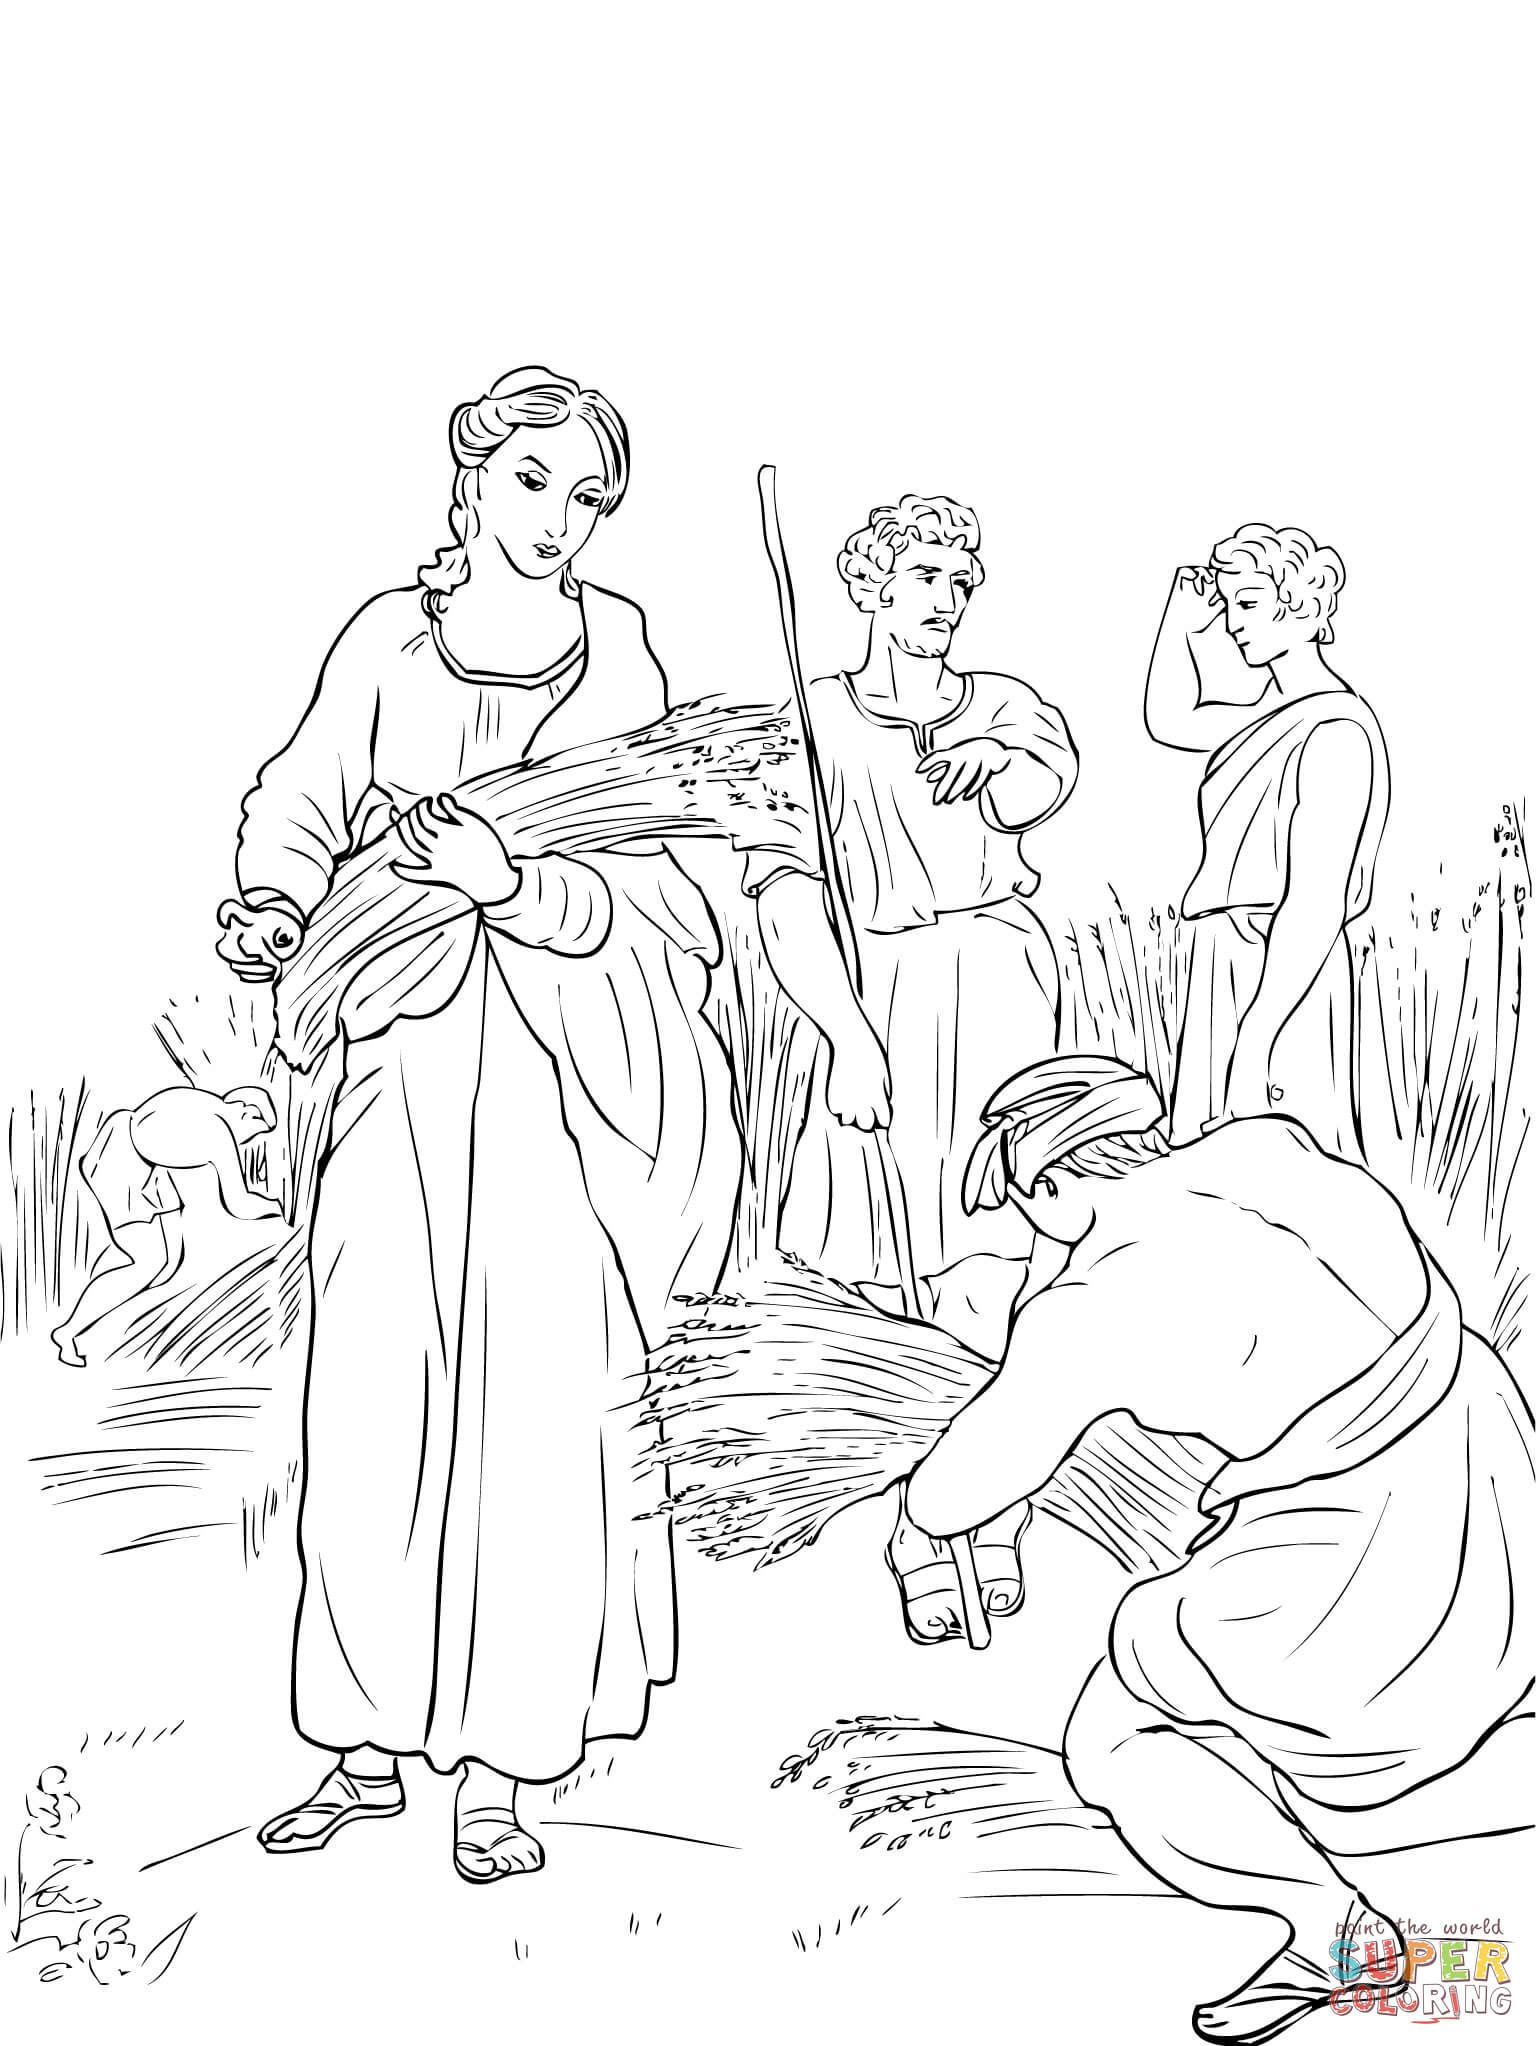 Ruth working in the fields coloring page free printable coloring pages ruth and naomi bible coloring pages sunday school coloring pages